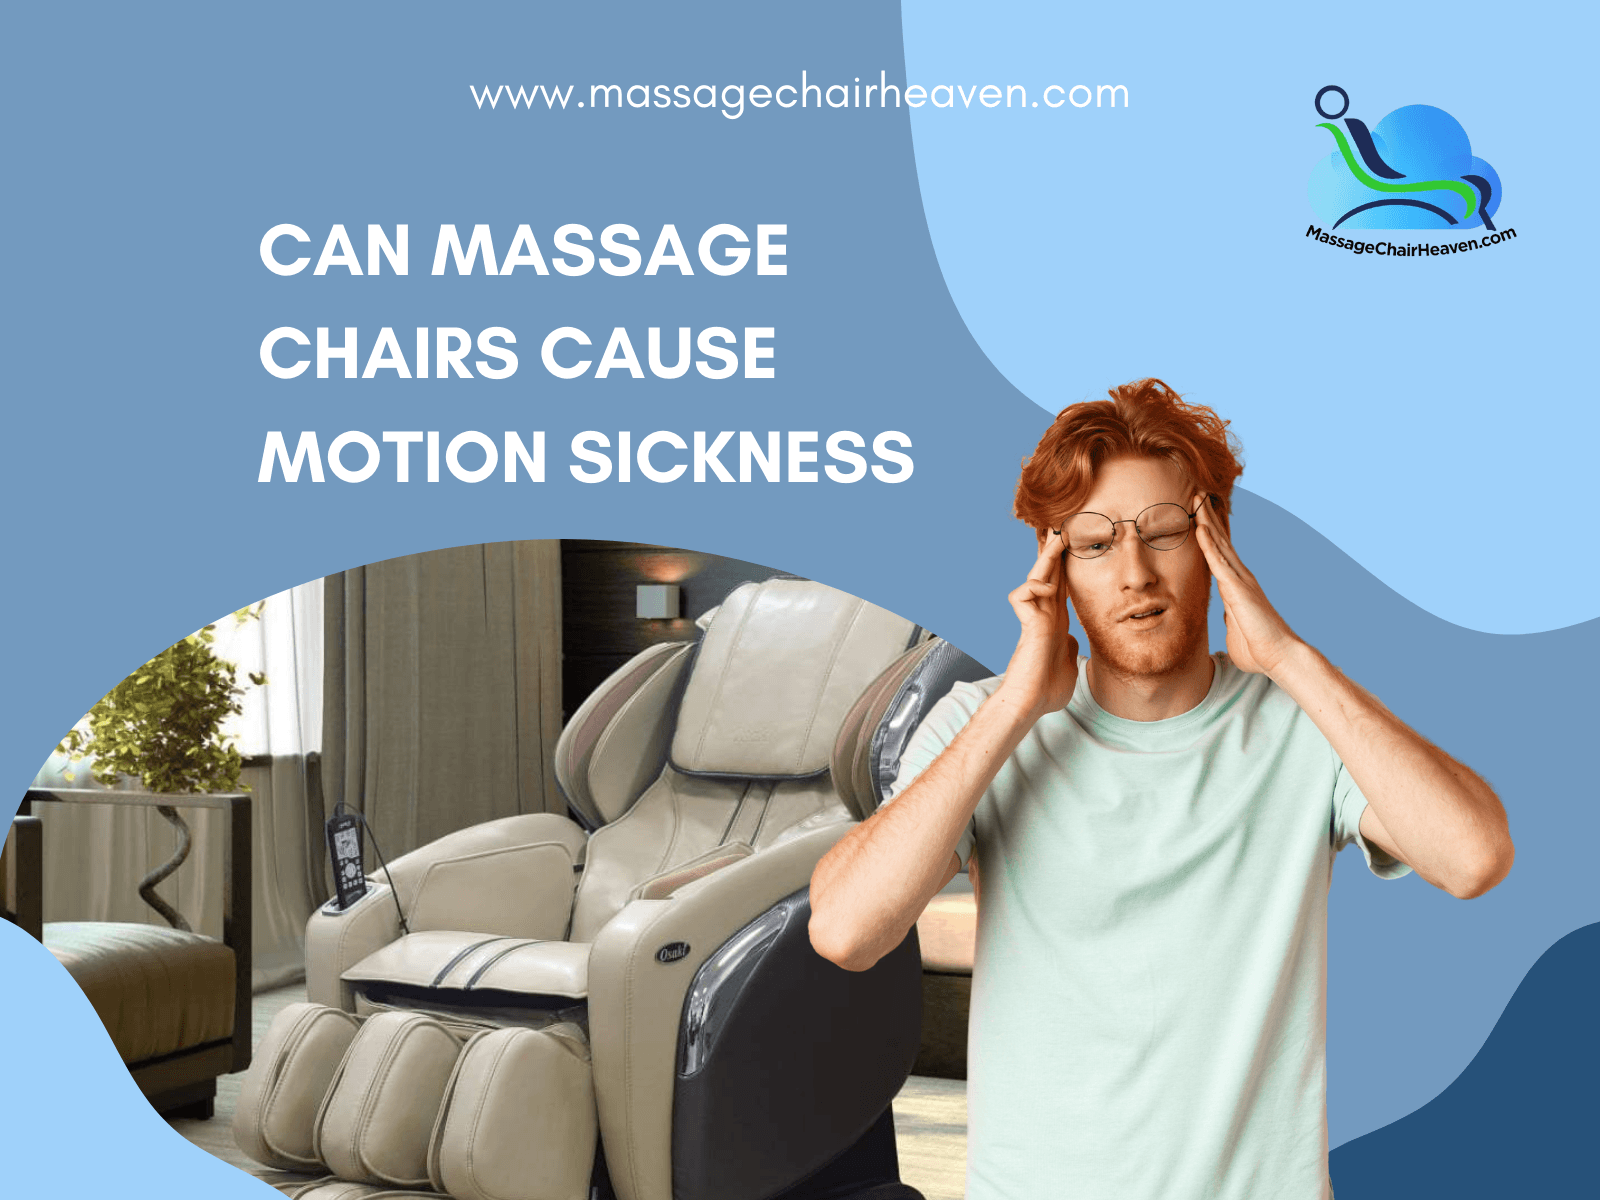 Can Massage Chairs Cause Motion Sickness? - Massage Chair Heaven